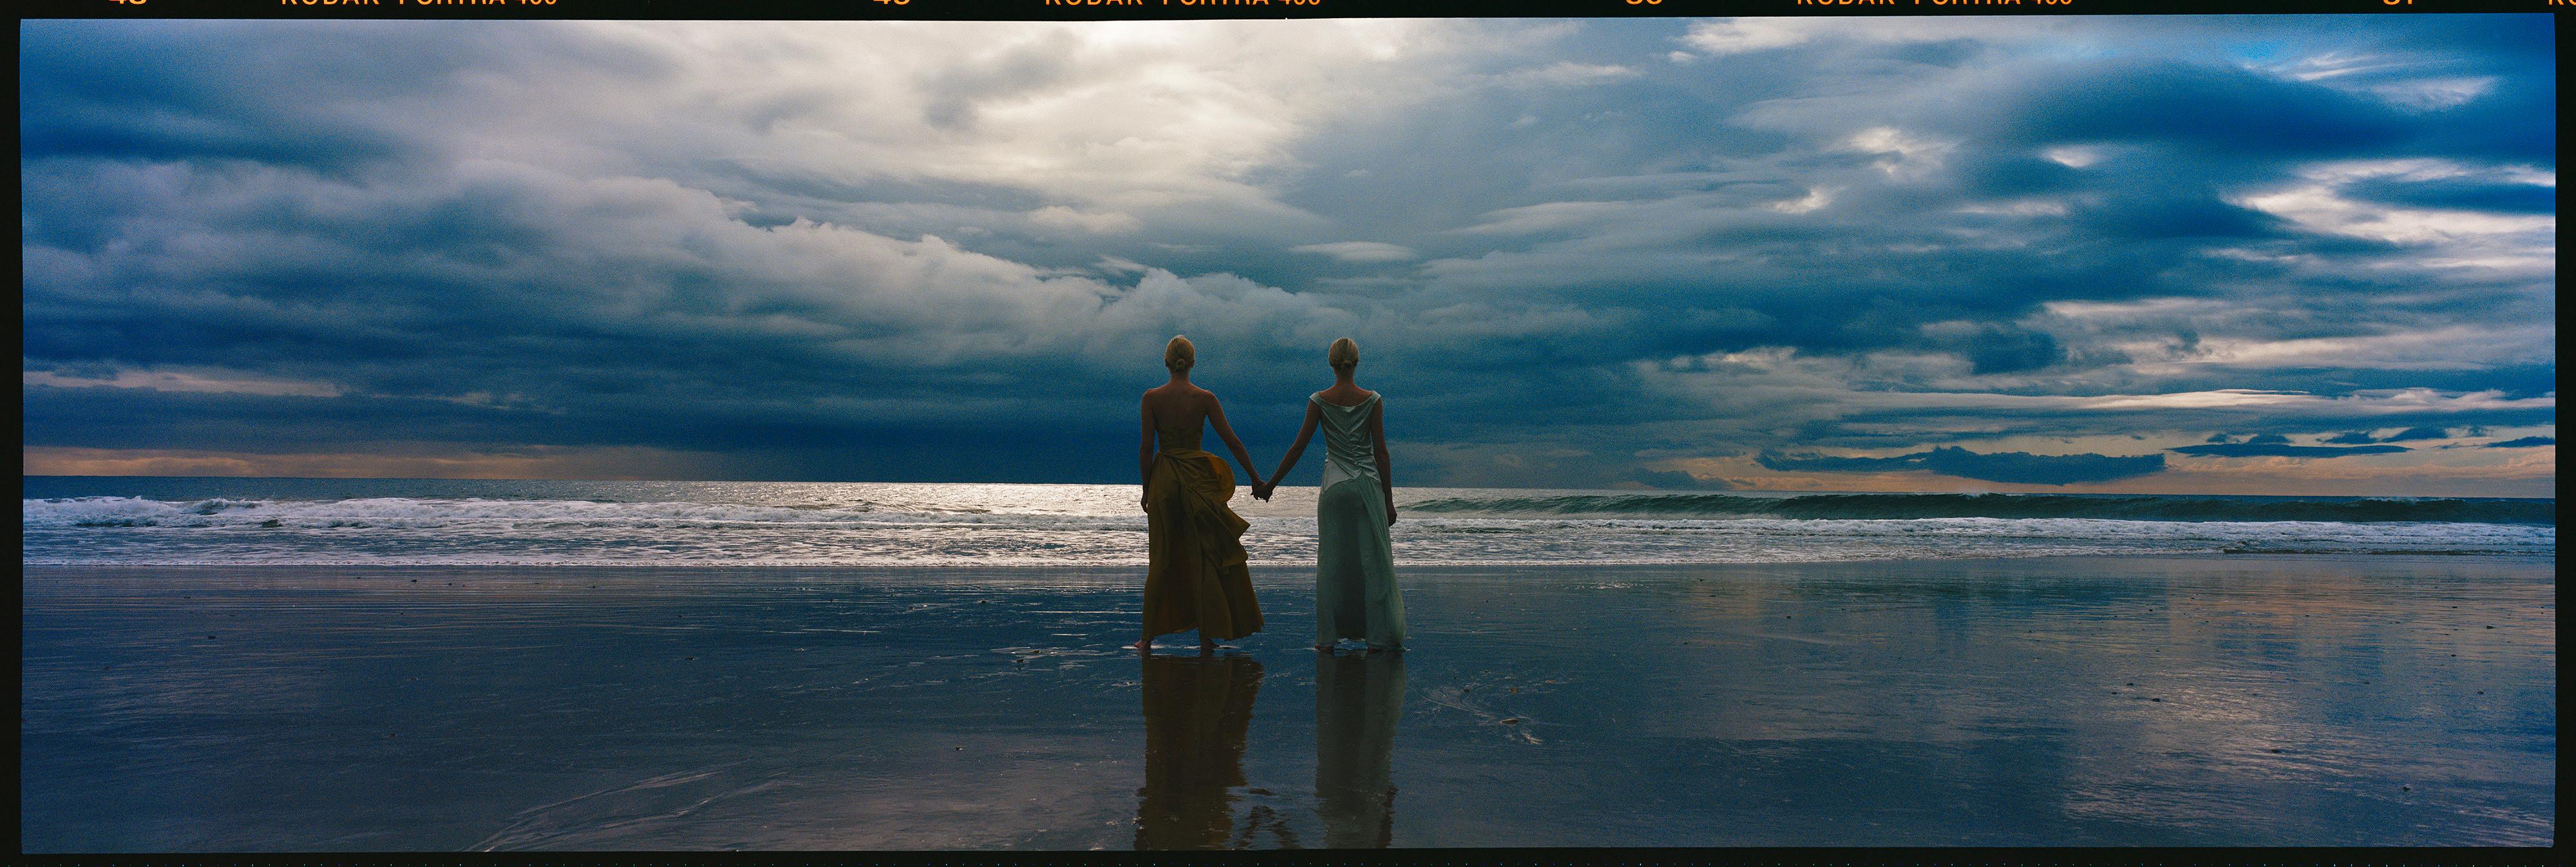 Tyler Shields Color Photograph - At The Oceans Edge (40" x 120")